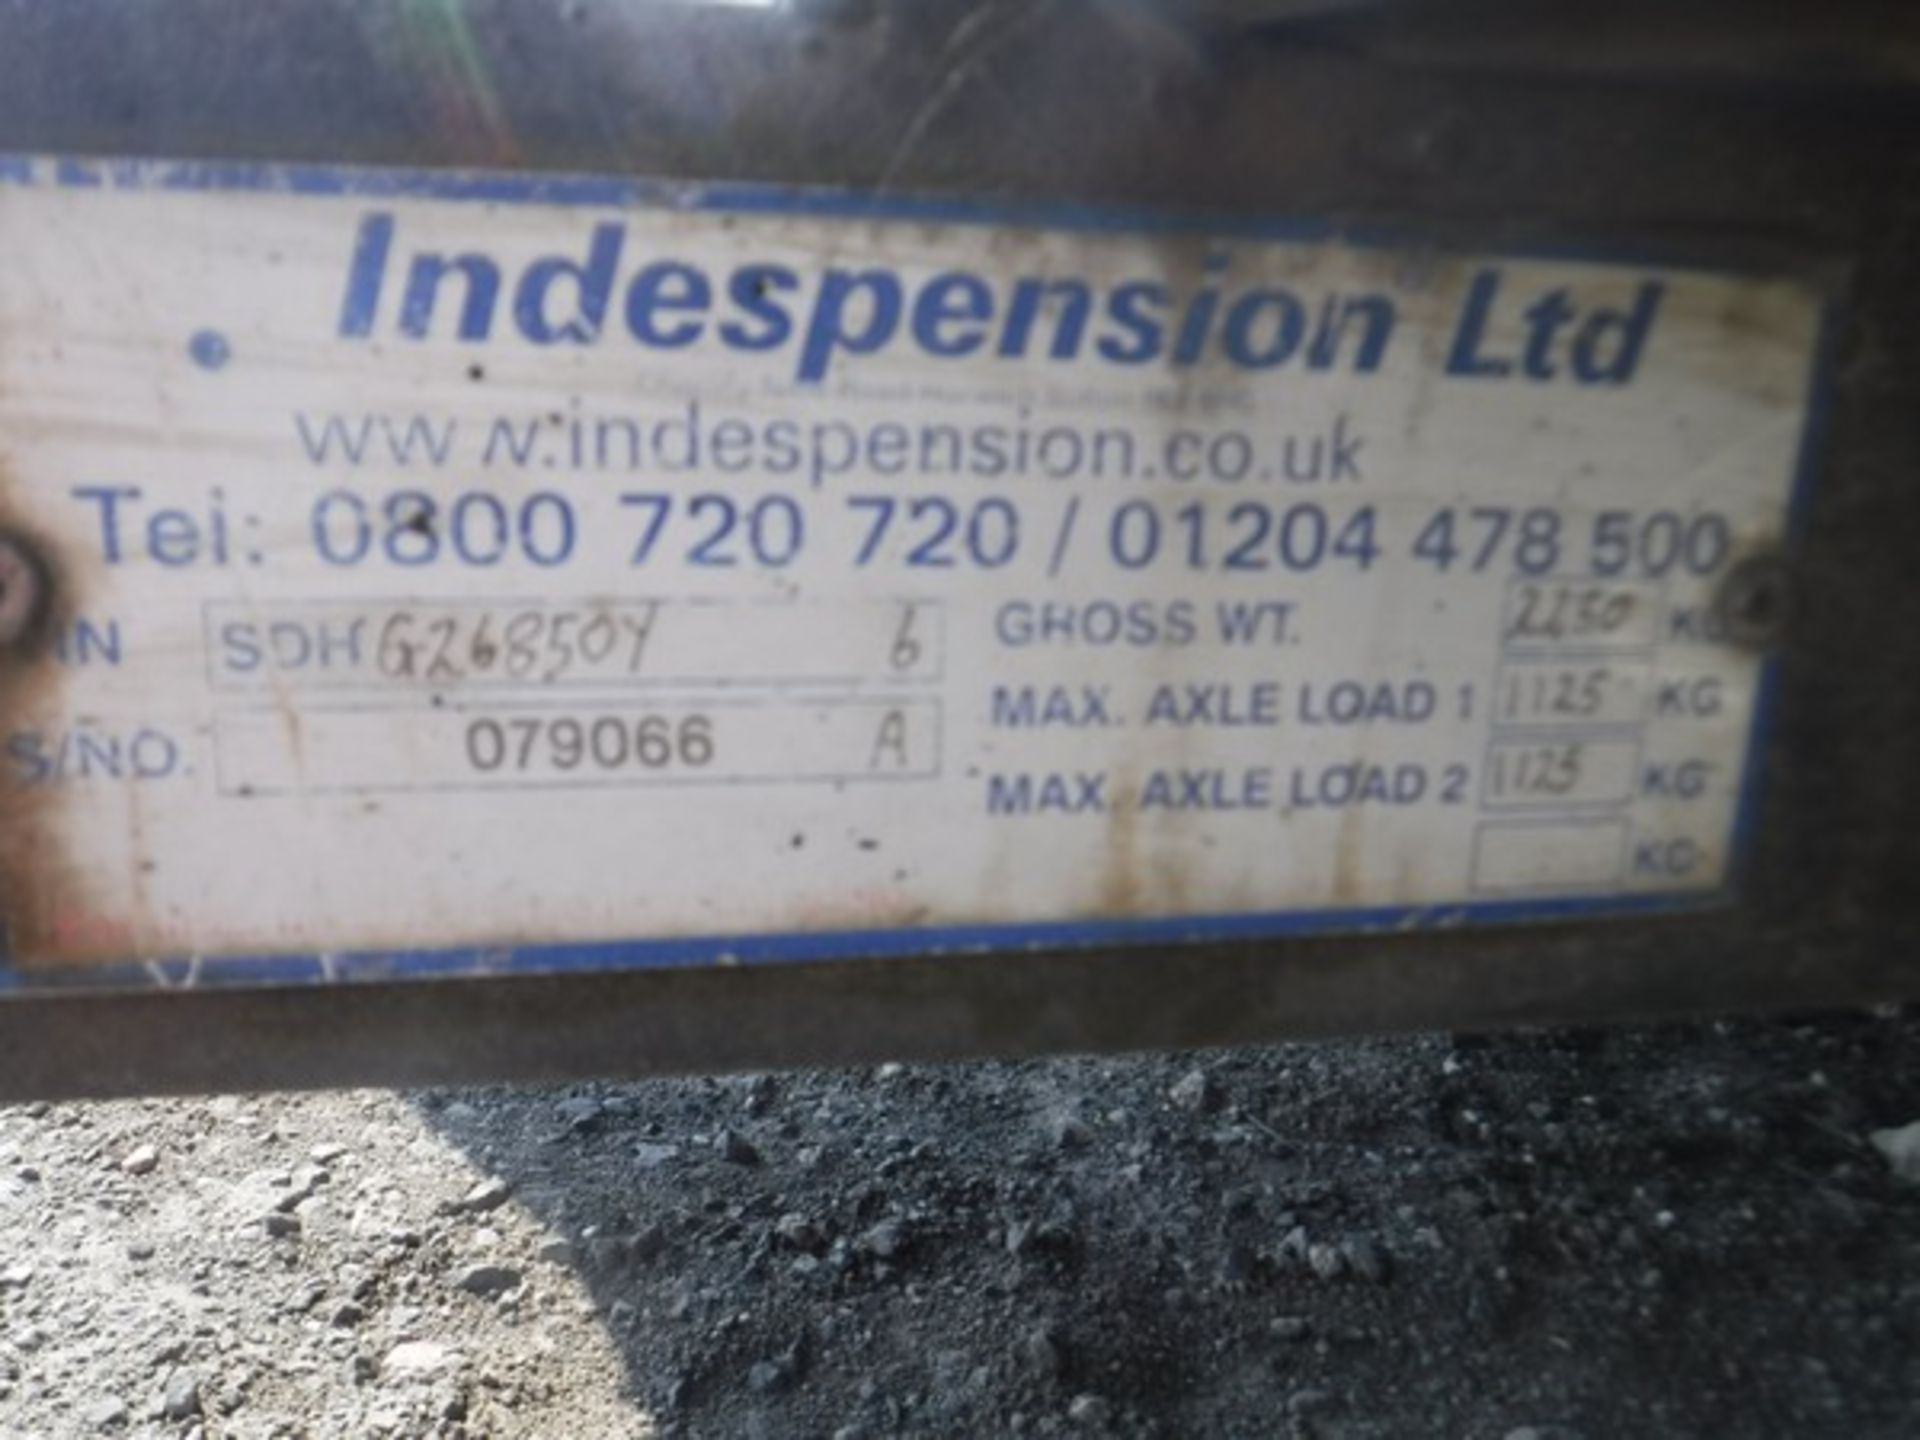 INDESPENSION 8&#39; x 5&#39; twin axle plant trailer. S/N079066 - Image 3 of 3